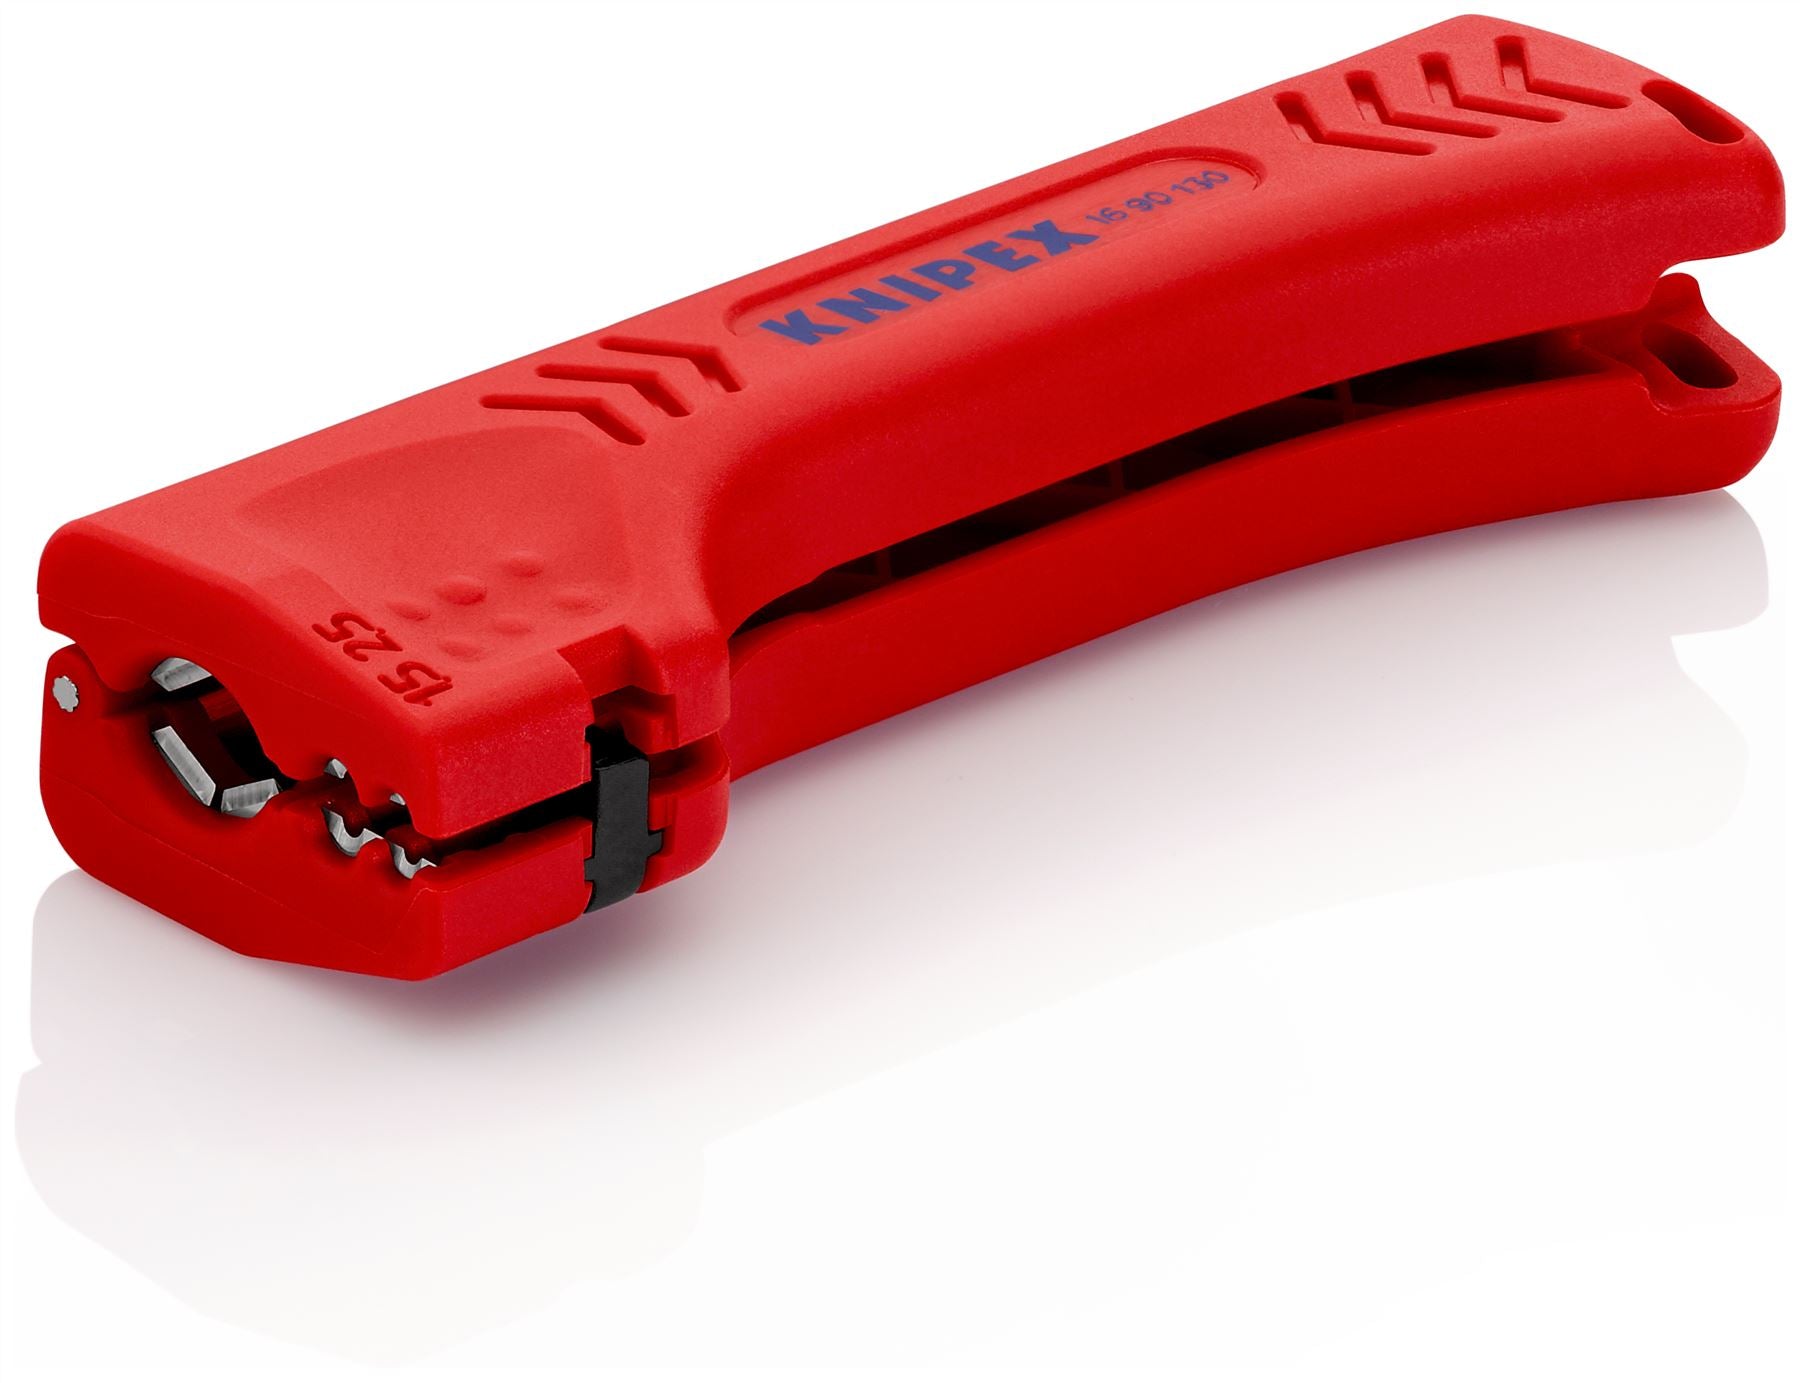 KNIPEX Universal Stripping Tool for Building and Industrial Cables for 8-13mm Diameter Cables 16 90 130 SB